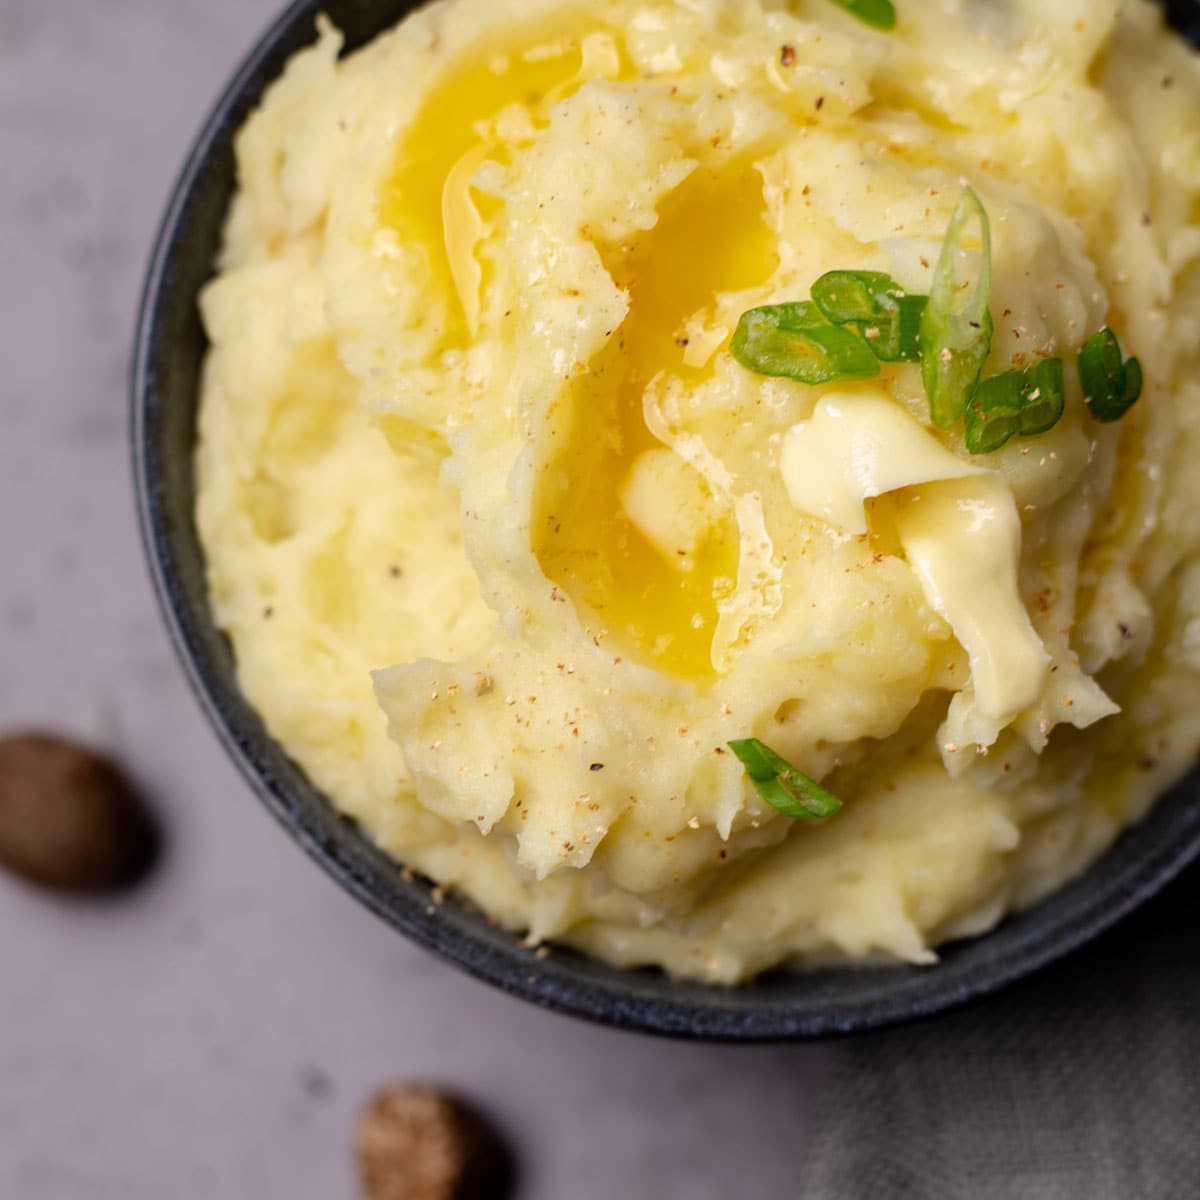 https://www.lexasrecipes.com/wp-content/uploads/2022/01/Kitchen-Aid-Mashed-Potatoes-Featured-1200px-2.jpg